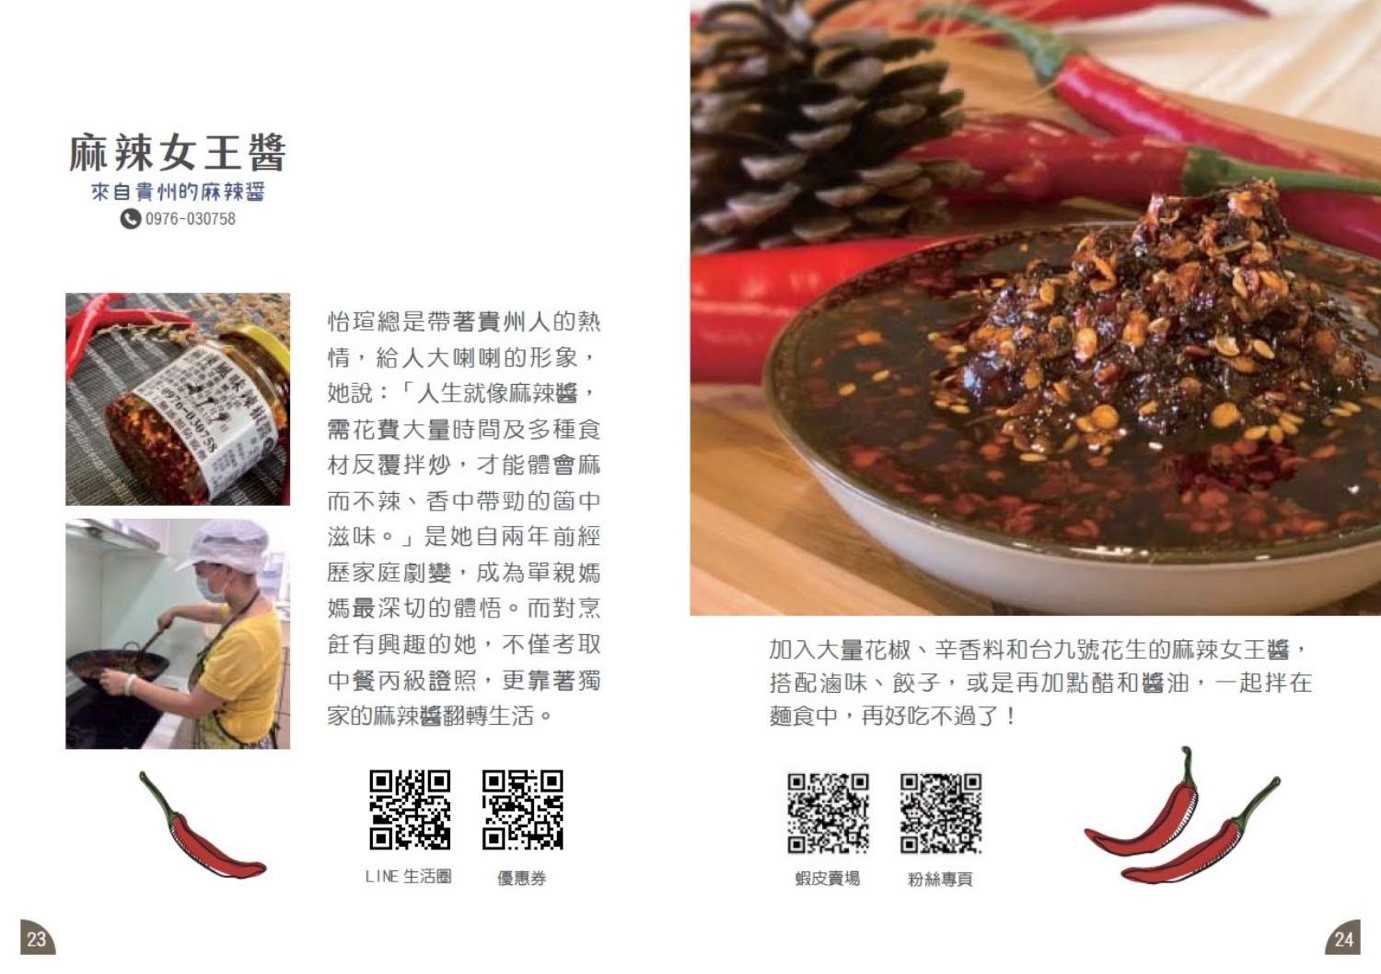 Chili Queen, the home-made chili sauce brand by Yi Xuan/ Hsinchu City Hall photo